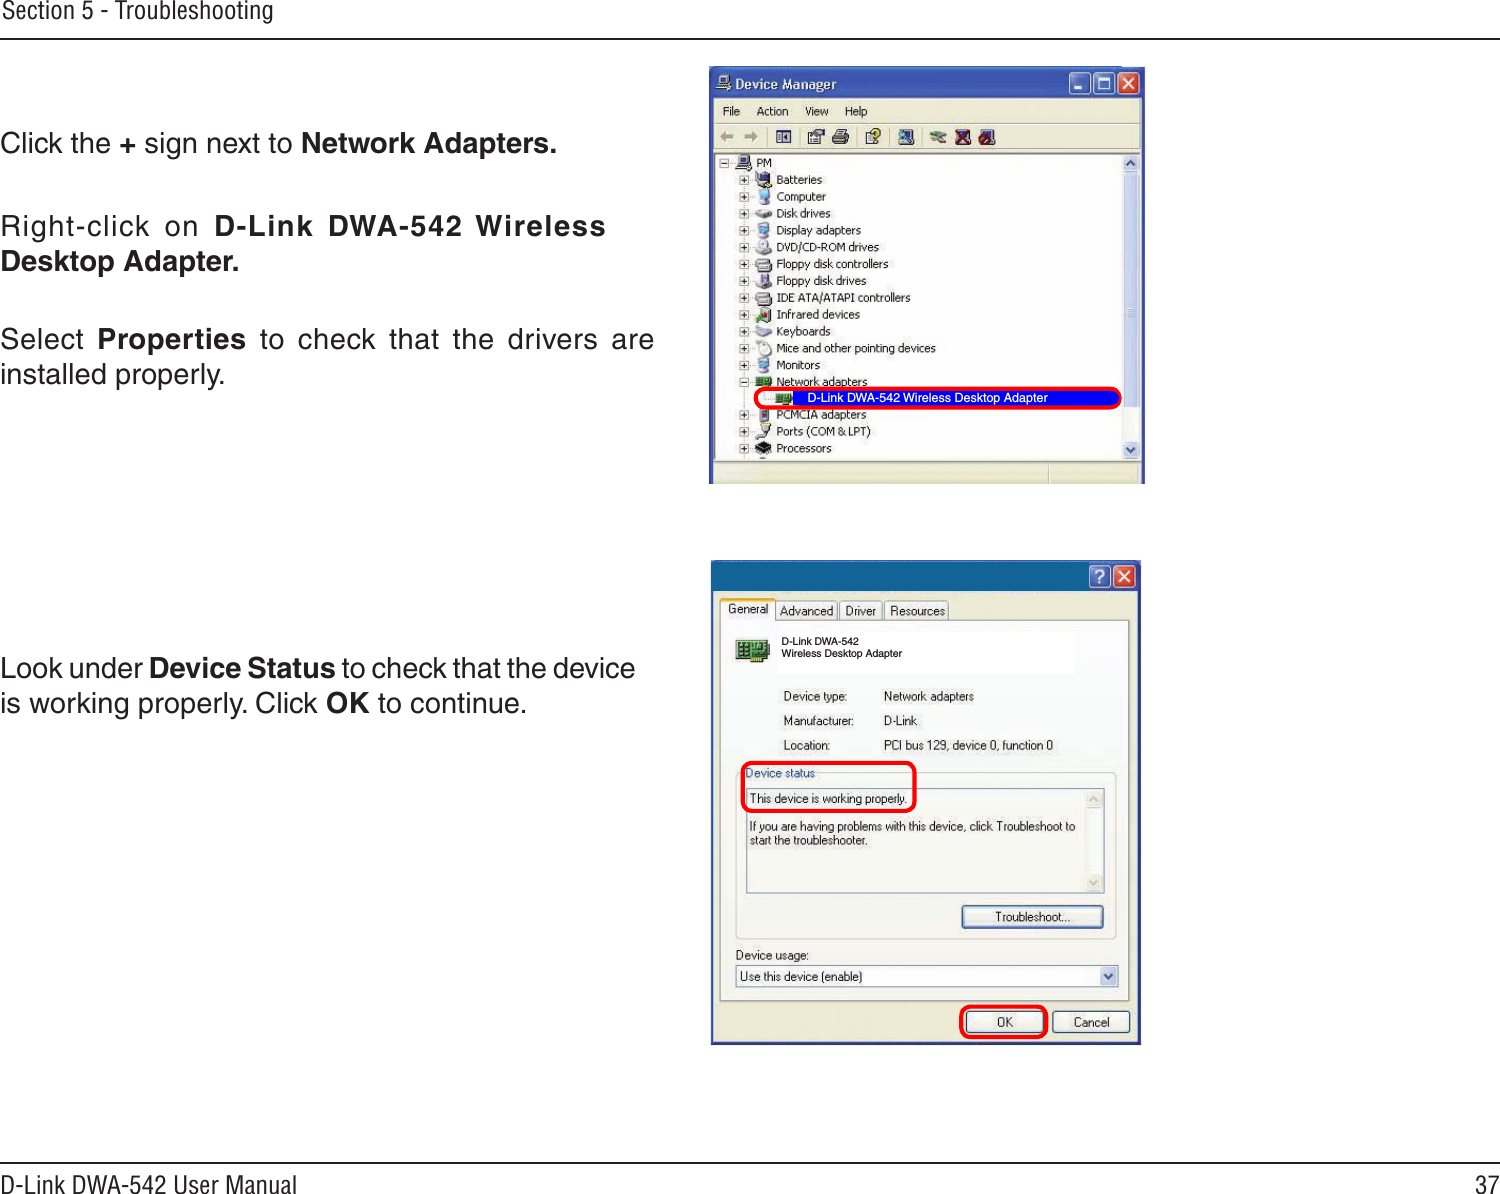 37D-Link DWA-542 User ManualSection 5 - TroubleshootingClick the + sign next to Network Adapters.Right-click  on  D-Link  DWA-542 Wireless Desktop Adapter.Select  Properties  to  check  that  the  drivers  are installed properly.Look under Device Status to check that the device is working properly. Click OK to continue.D-Link DWA-542 Wireless Desktop AdapterD-Link DWA-542 Wireless Desktop Adapter